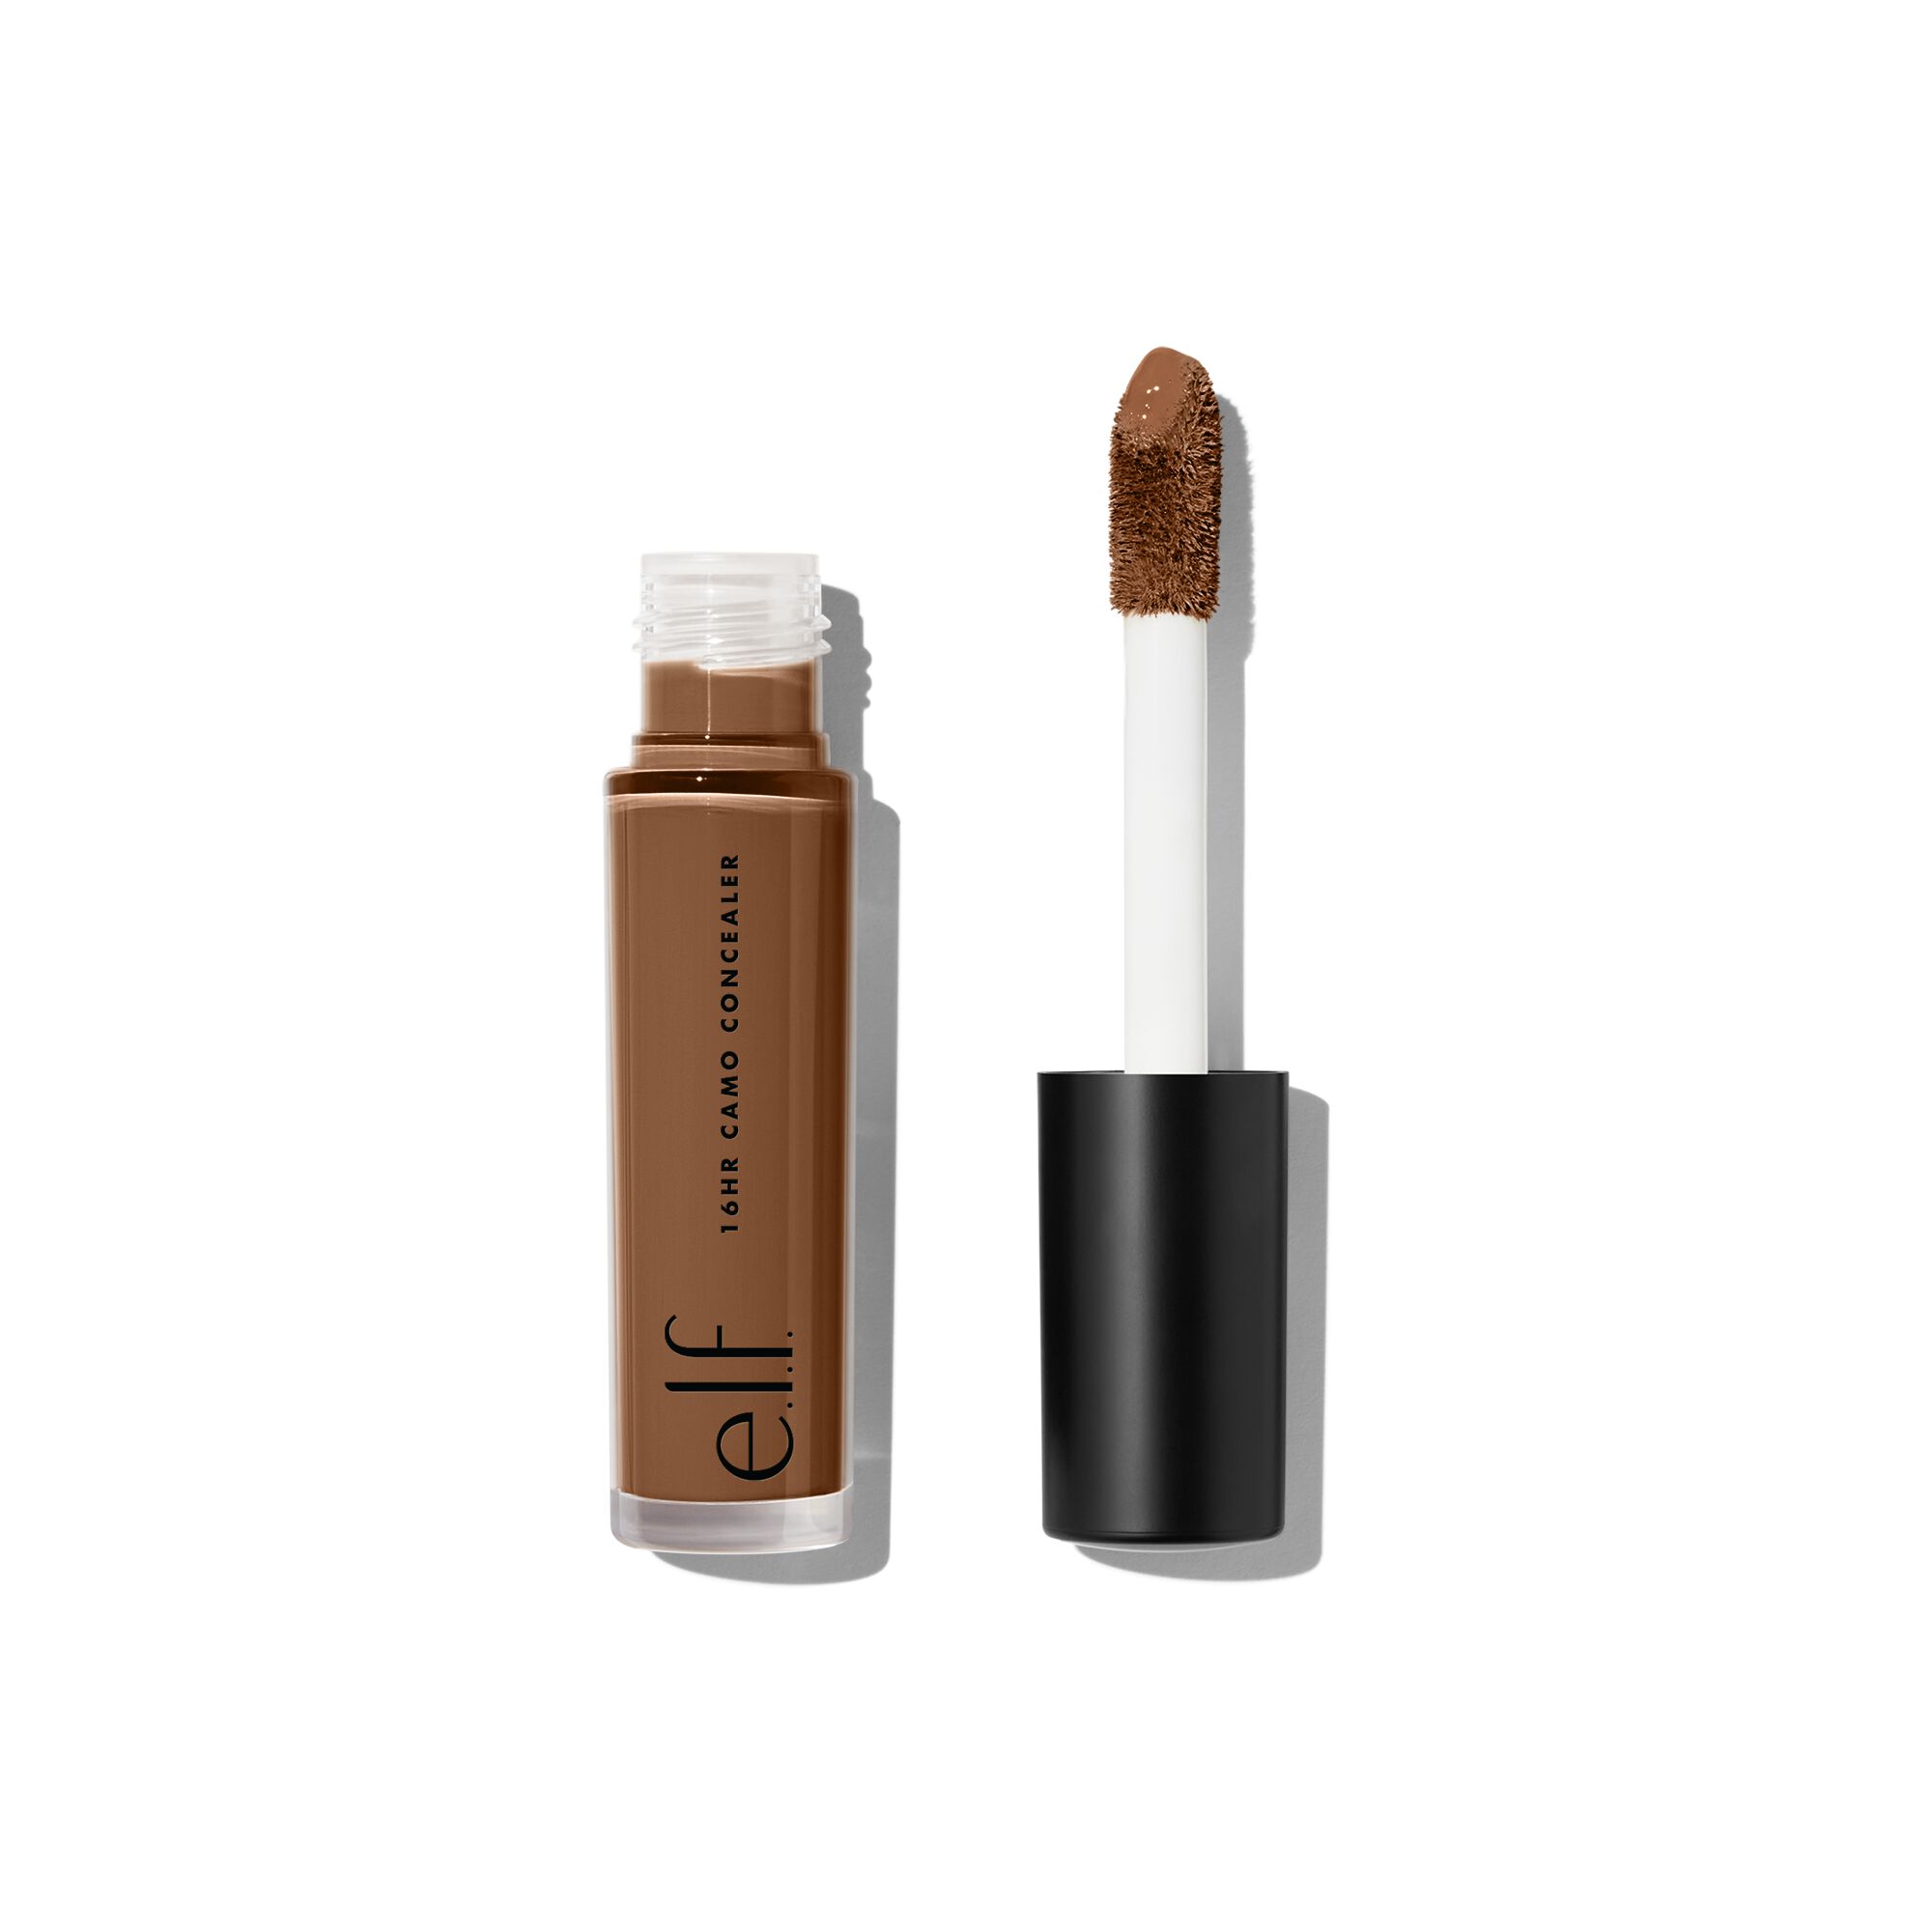 e.l.f. 16HR Camo Concealer, Full Coverage & Highly Pigmented, Matte Finish, Rich Cocoa, 0.203 Fl Oz (6mL) Rich Cocoa 0.20 Fl Oz (Pack of 1)